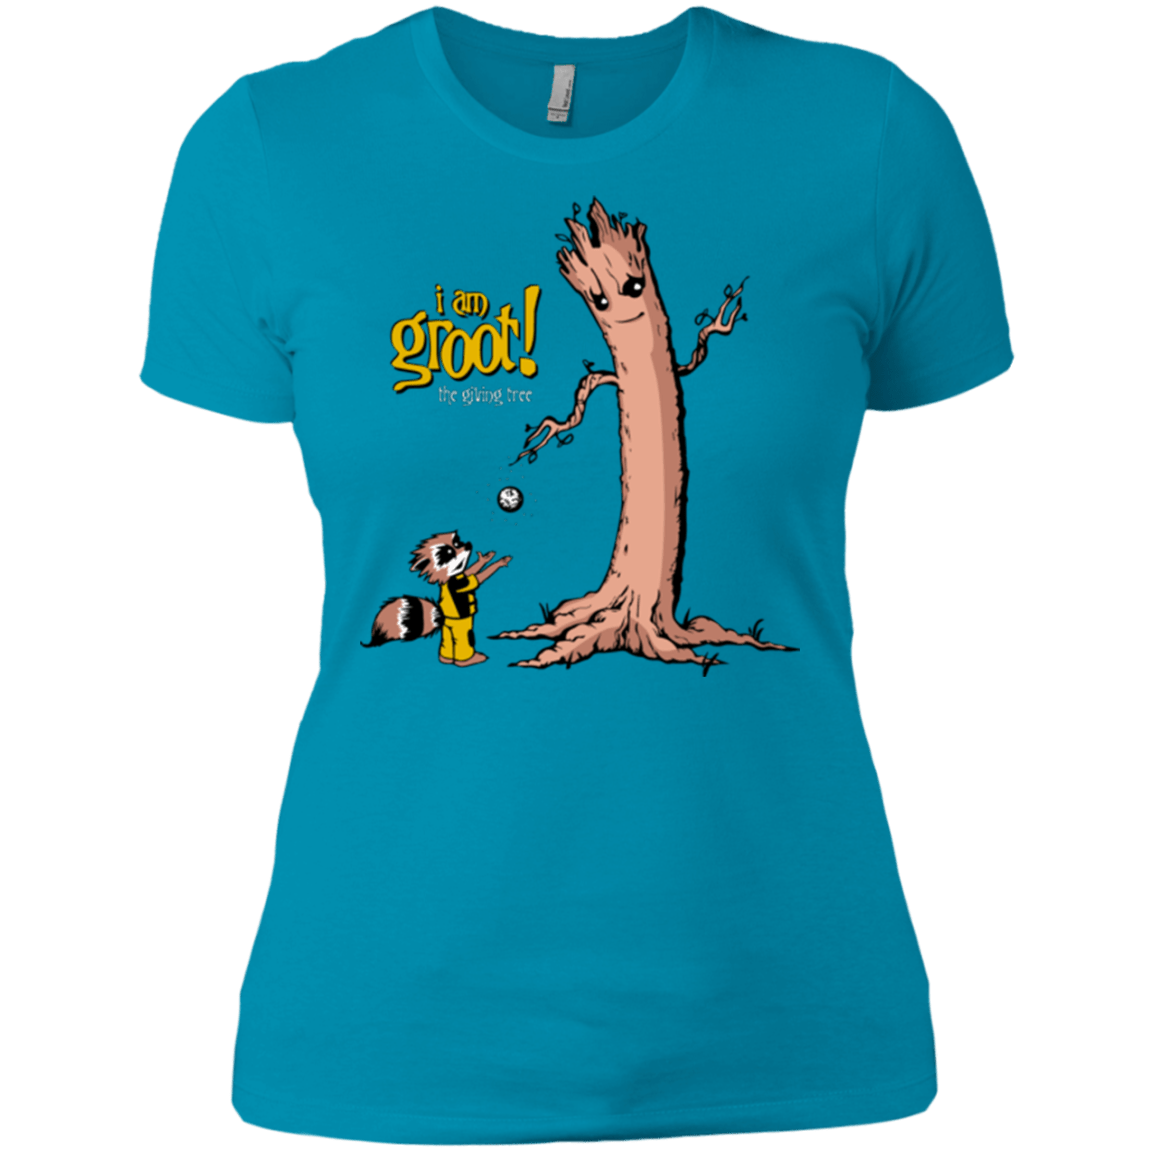 T-Shirts Turquoise / X-Small Groots Giving Women's Premium T-Shirt